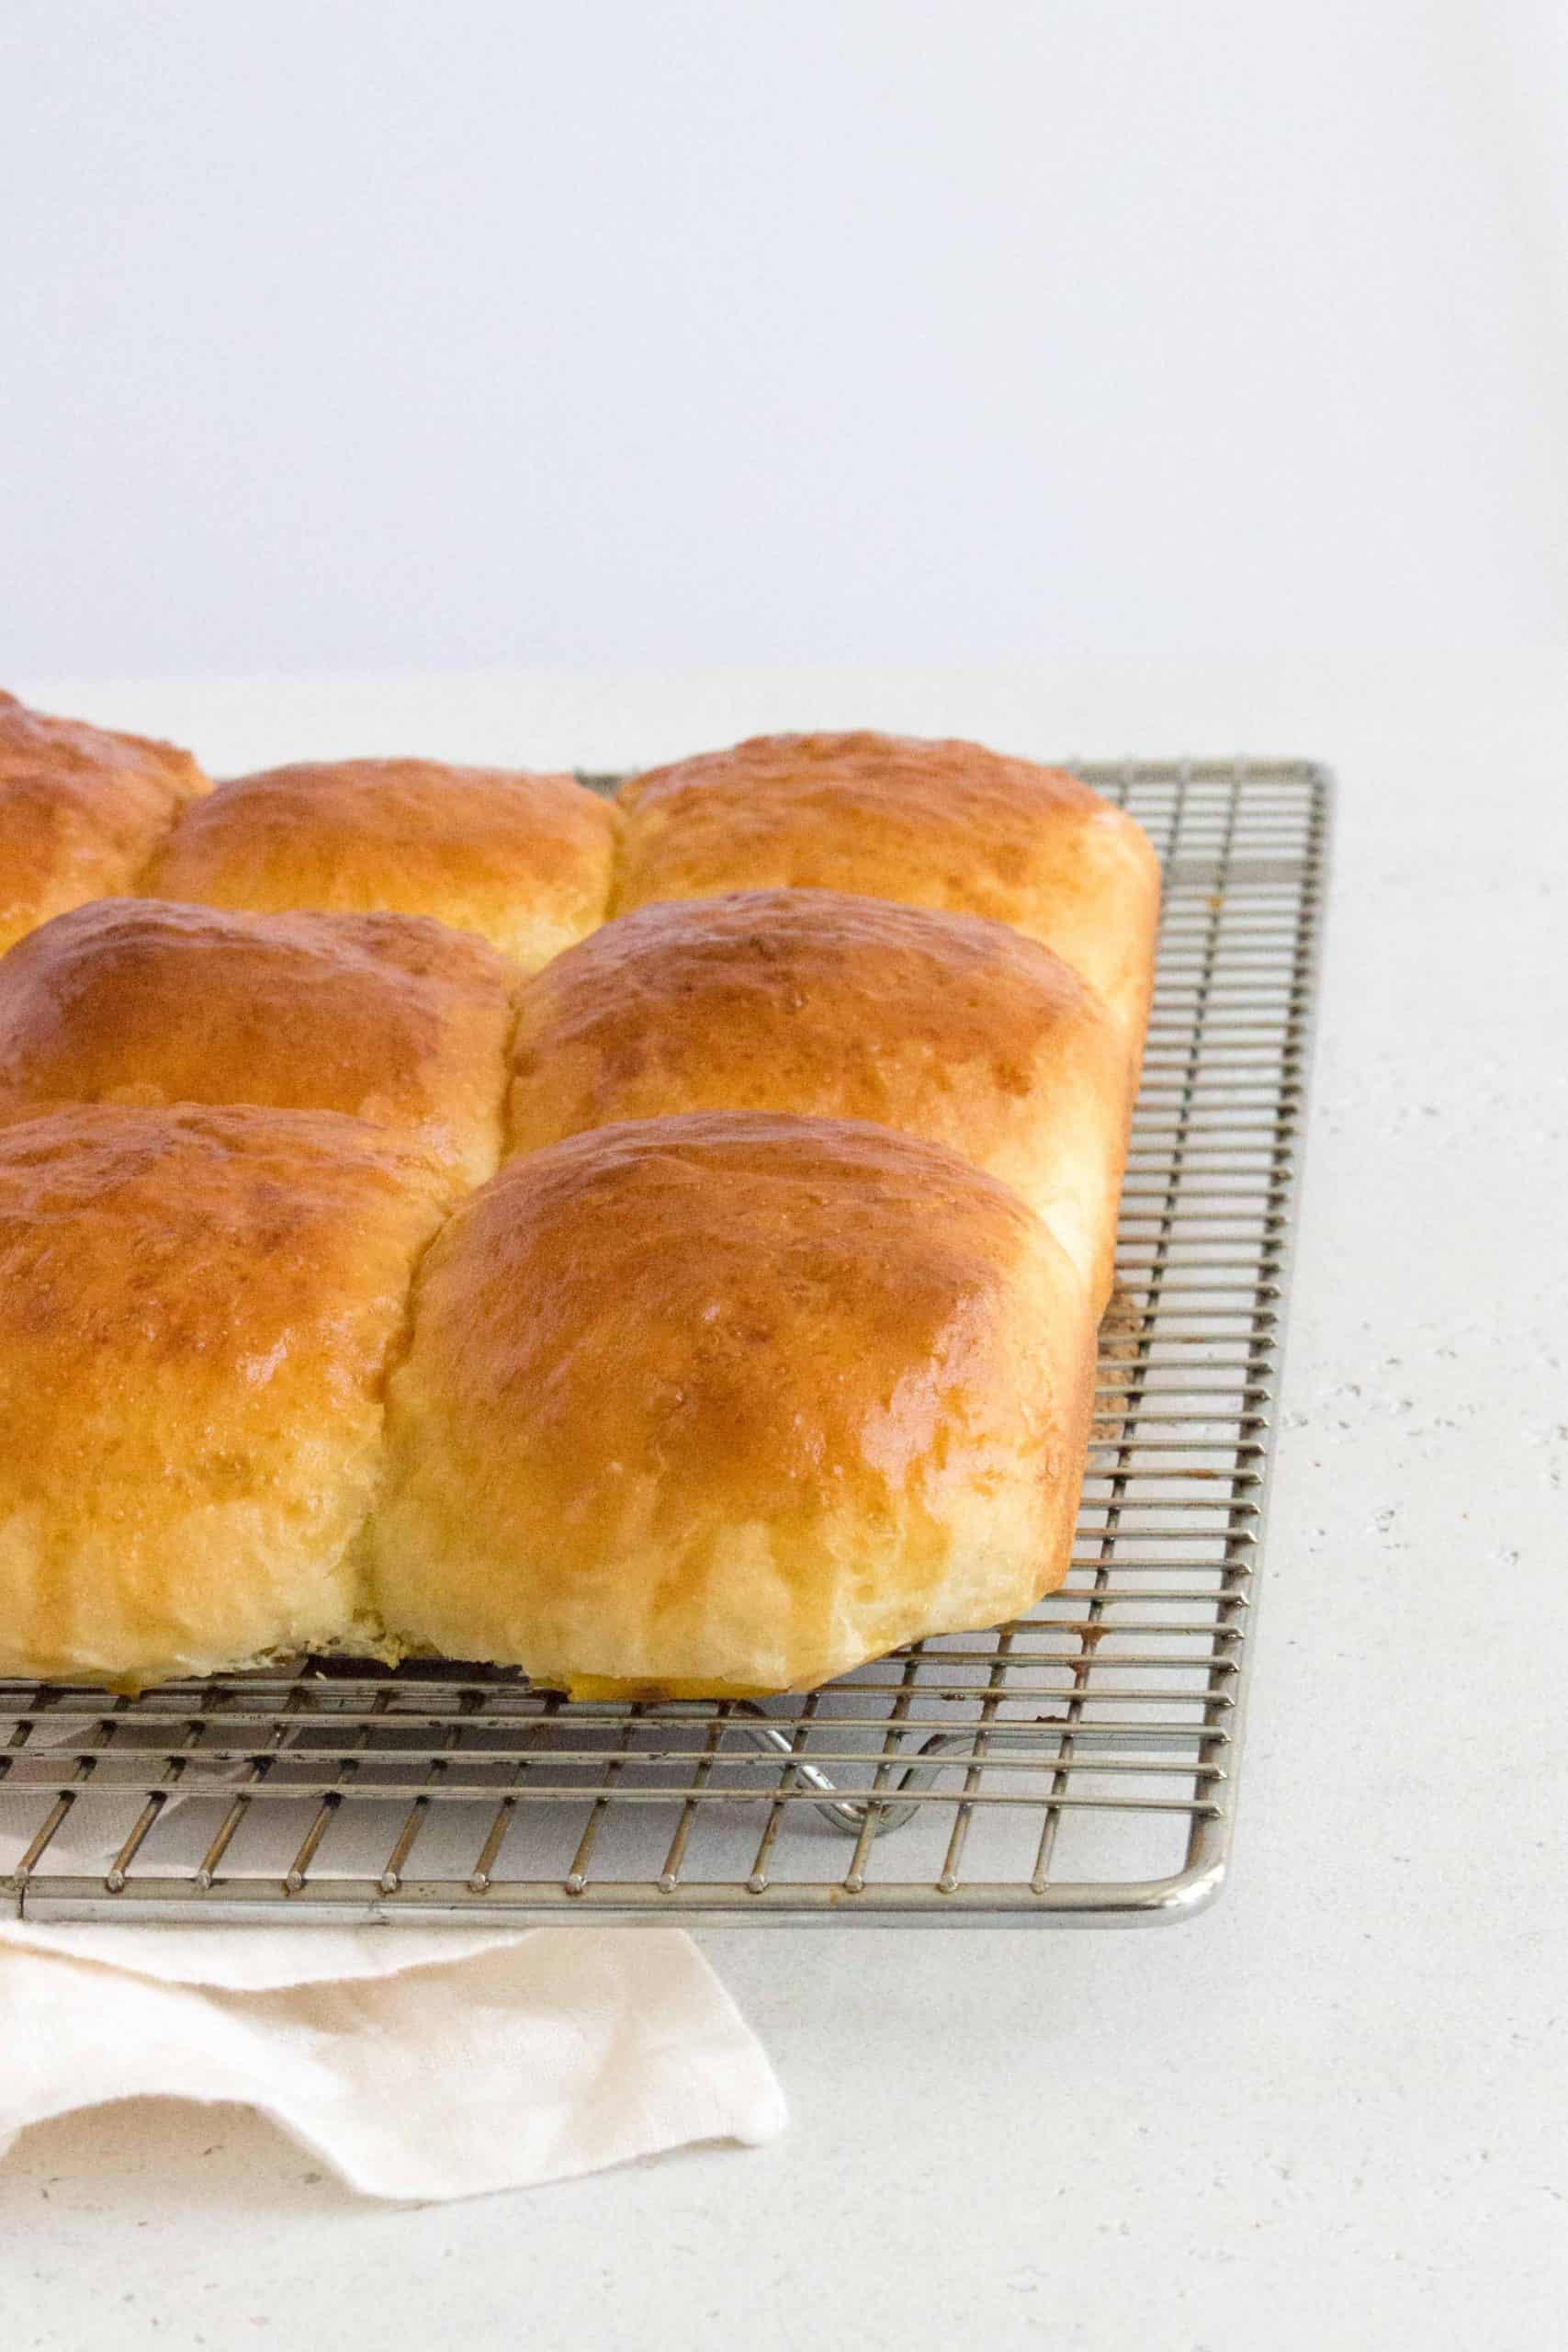 Here's how you can make fluffy, pillowy soft Hokkaido style milk bread rolls at home with this simple recipe. The perfect make ahead bread as they stay soft for days! Try these Japanese Milk Bread Rolls tonight!